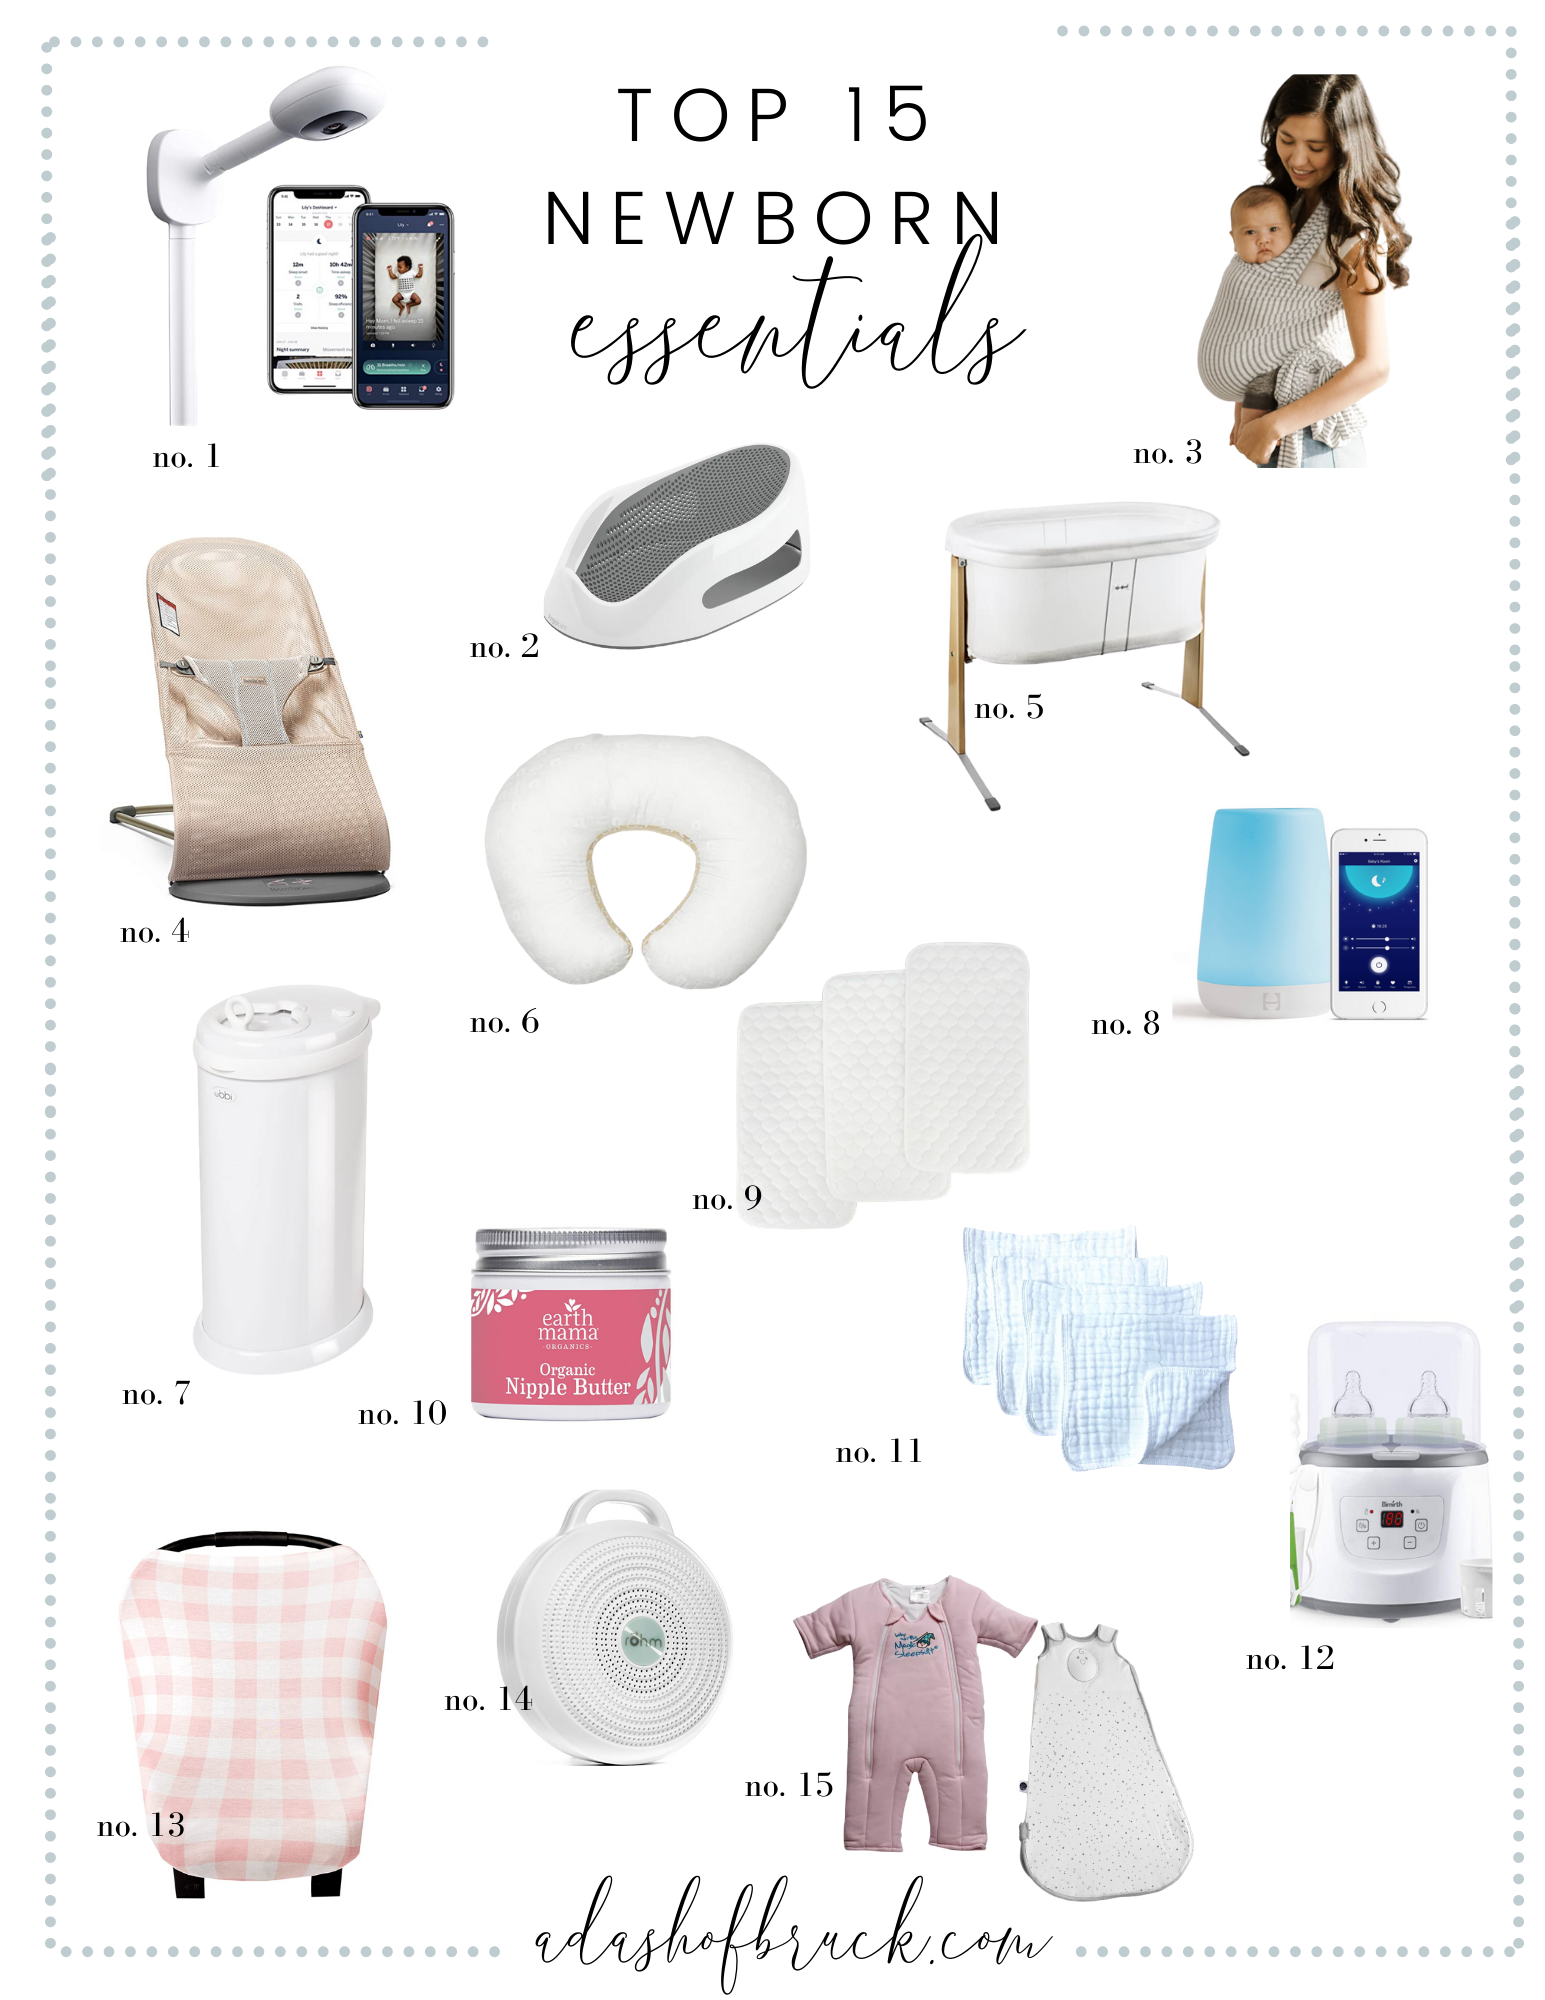 Baby Essentials That Are OK to Buy Used